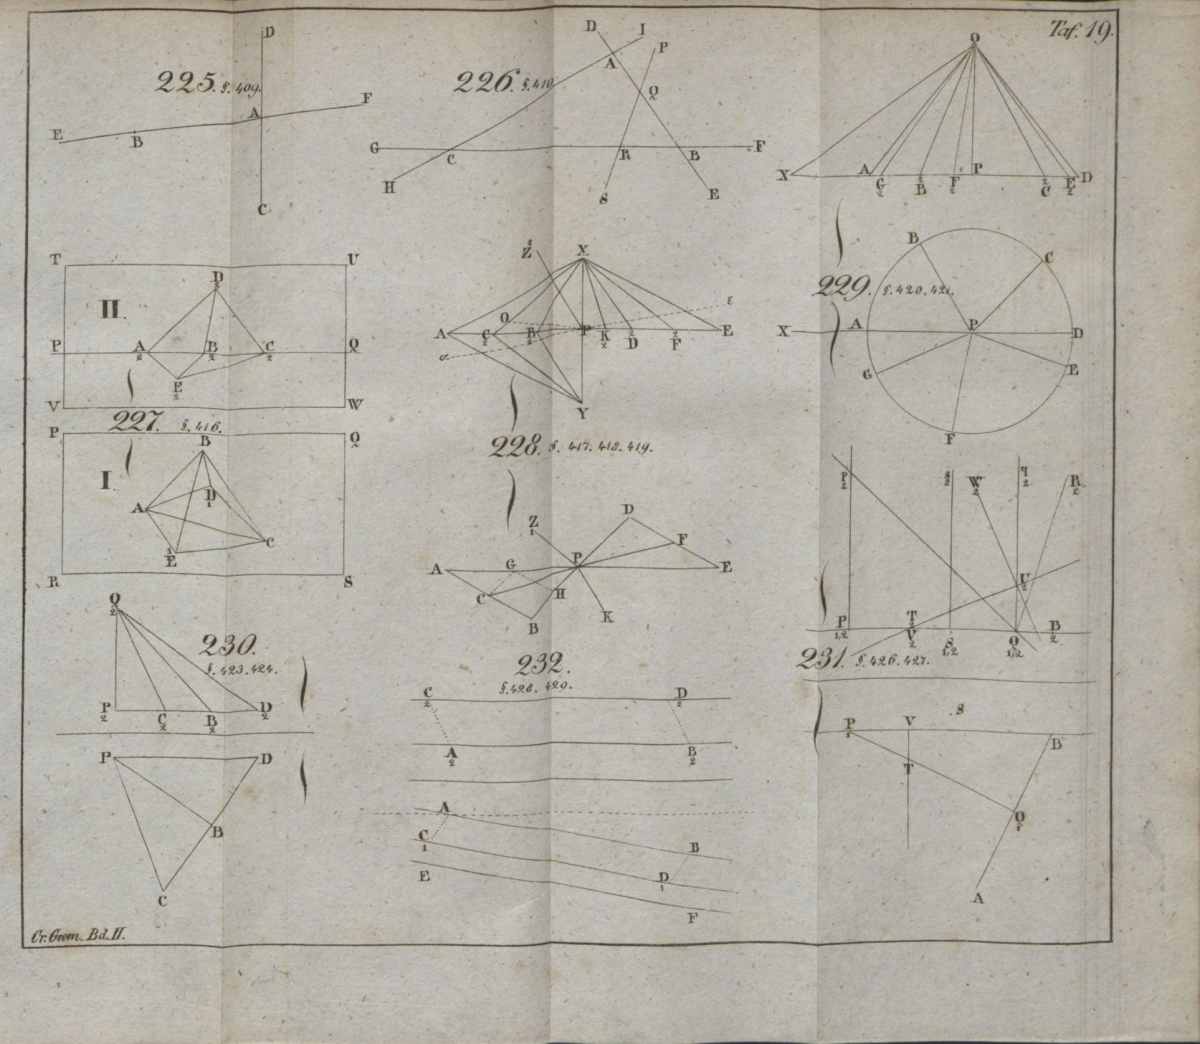 Plate 19 from Crelle's geometry textbook.